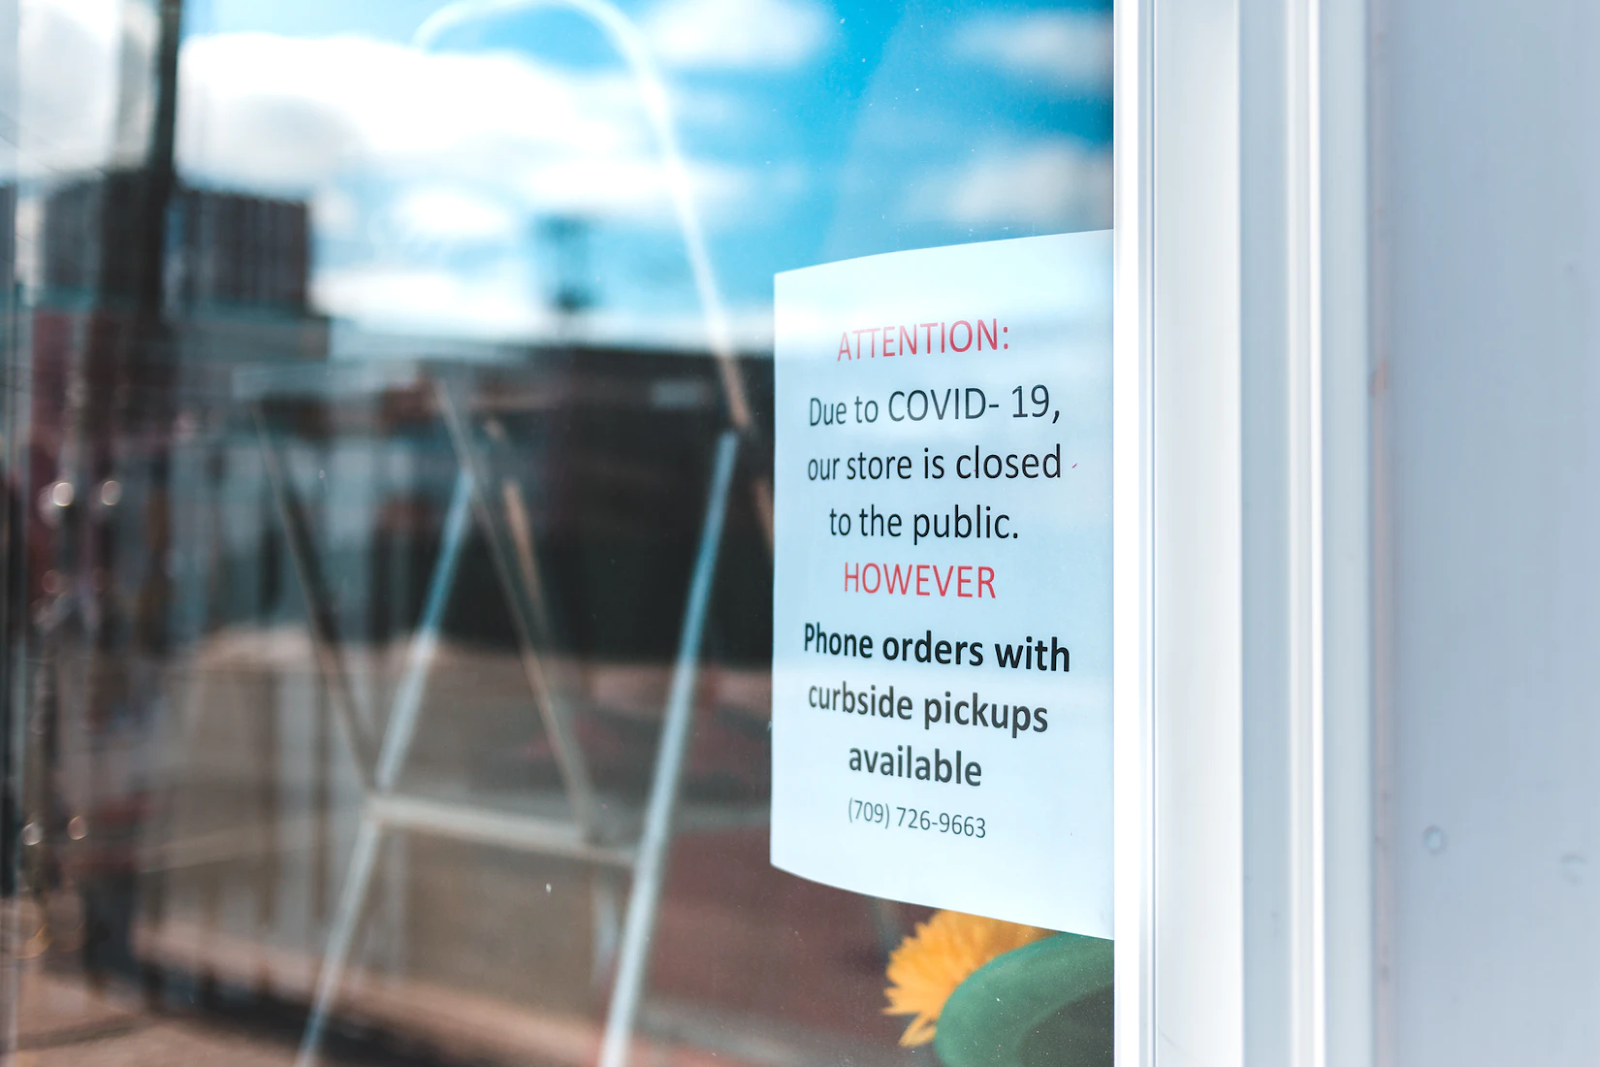 An image of a flyer in a store window that reads "Attention: due to COVID-19, our store is closed to the public. HOWEVER, phone orders with curbside pickups available."